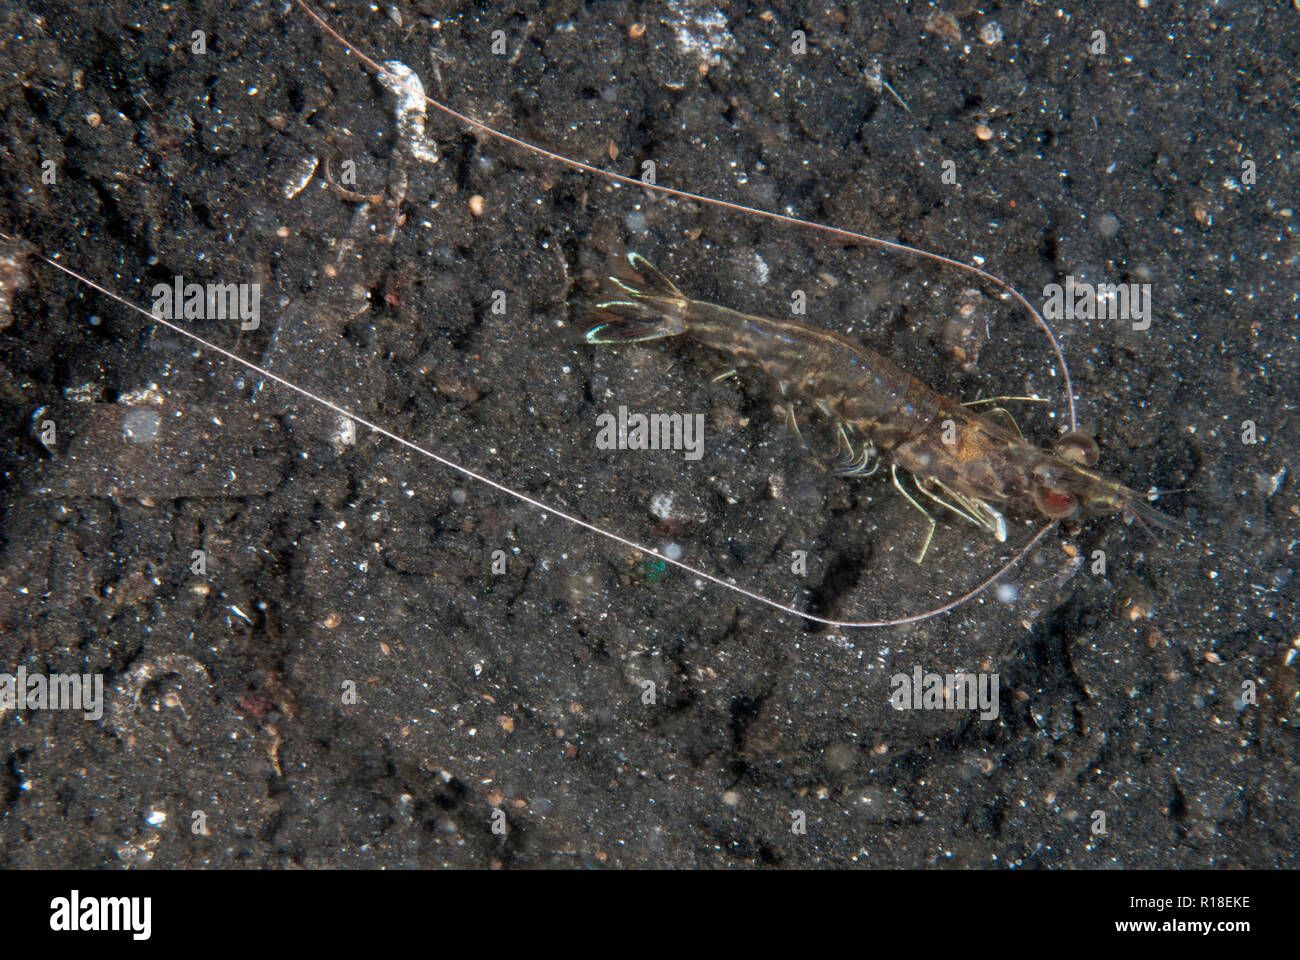 Nocturnal Prawn, Metapenaeus sp, with long antennae on black sand, TK1 dive site, Lembeh Straits, Sulawesi, Indonesia Stock Photo